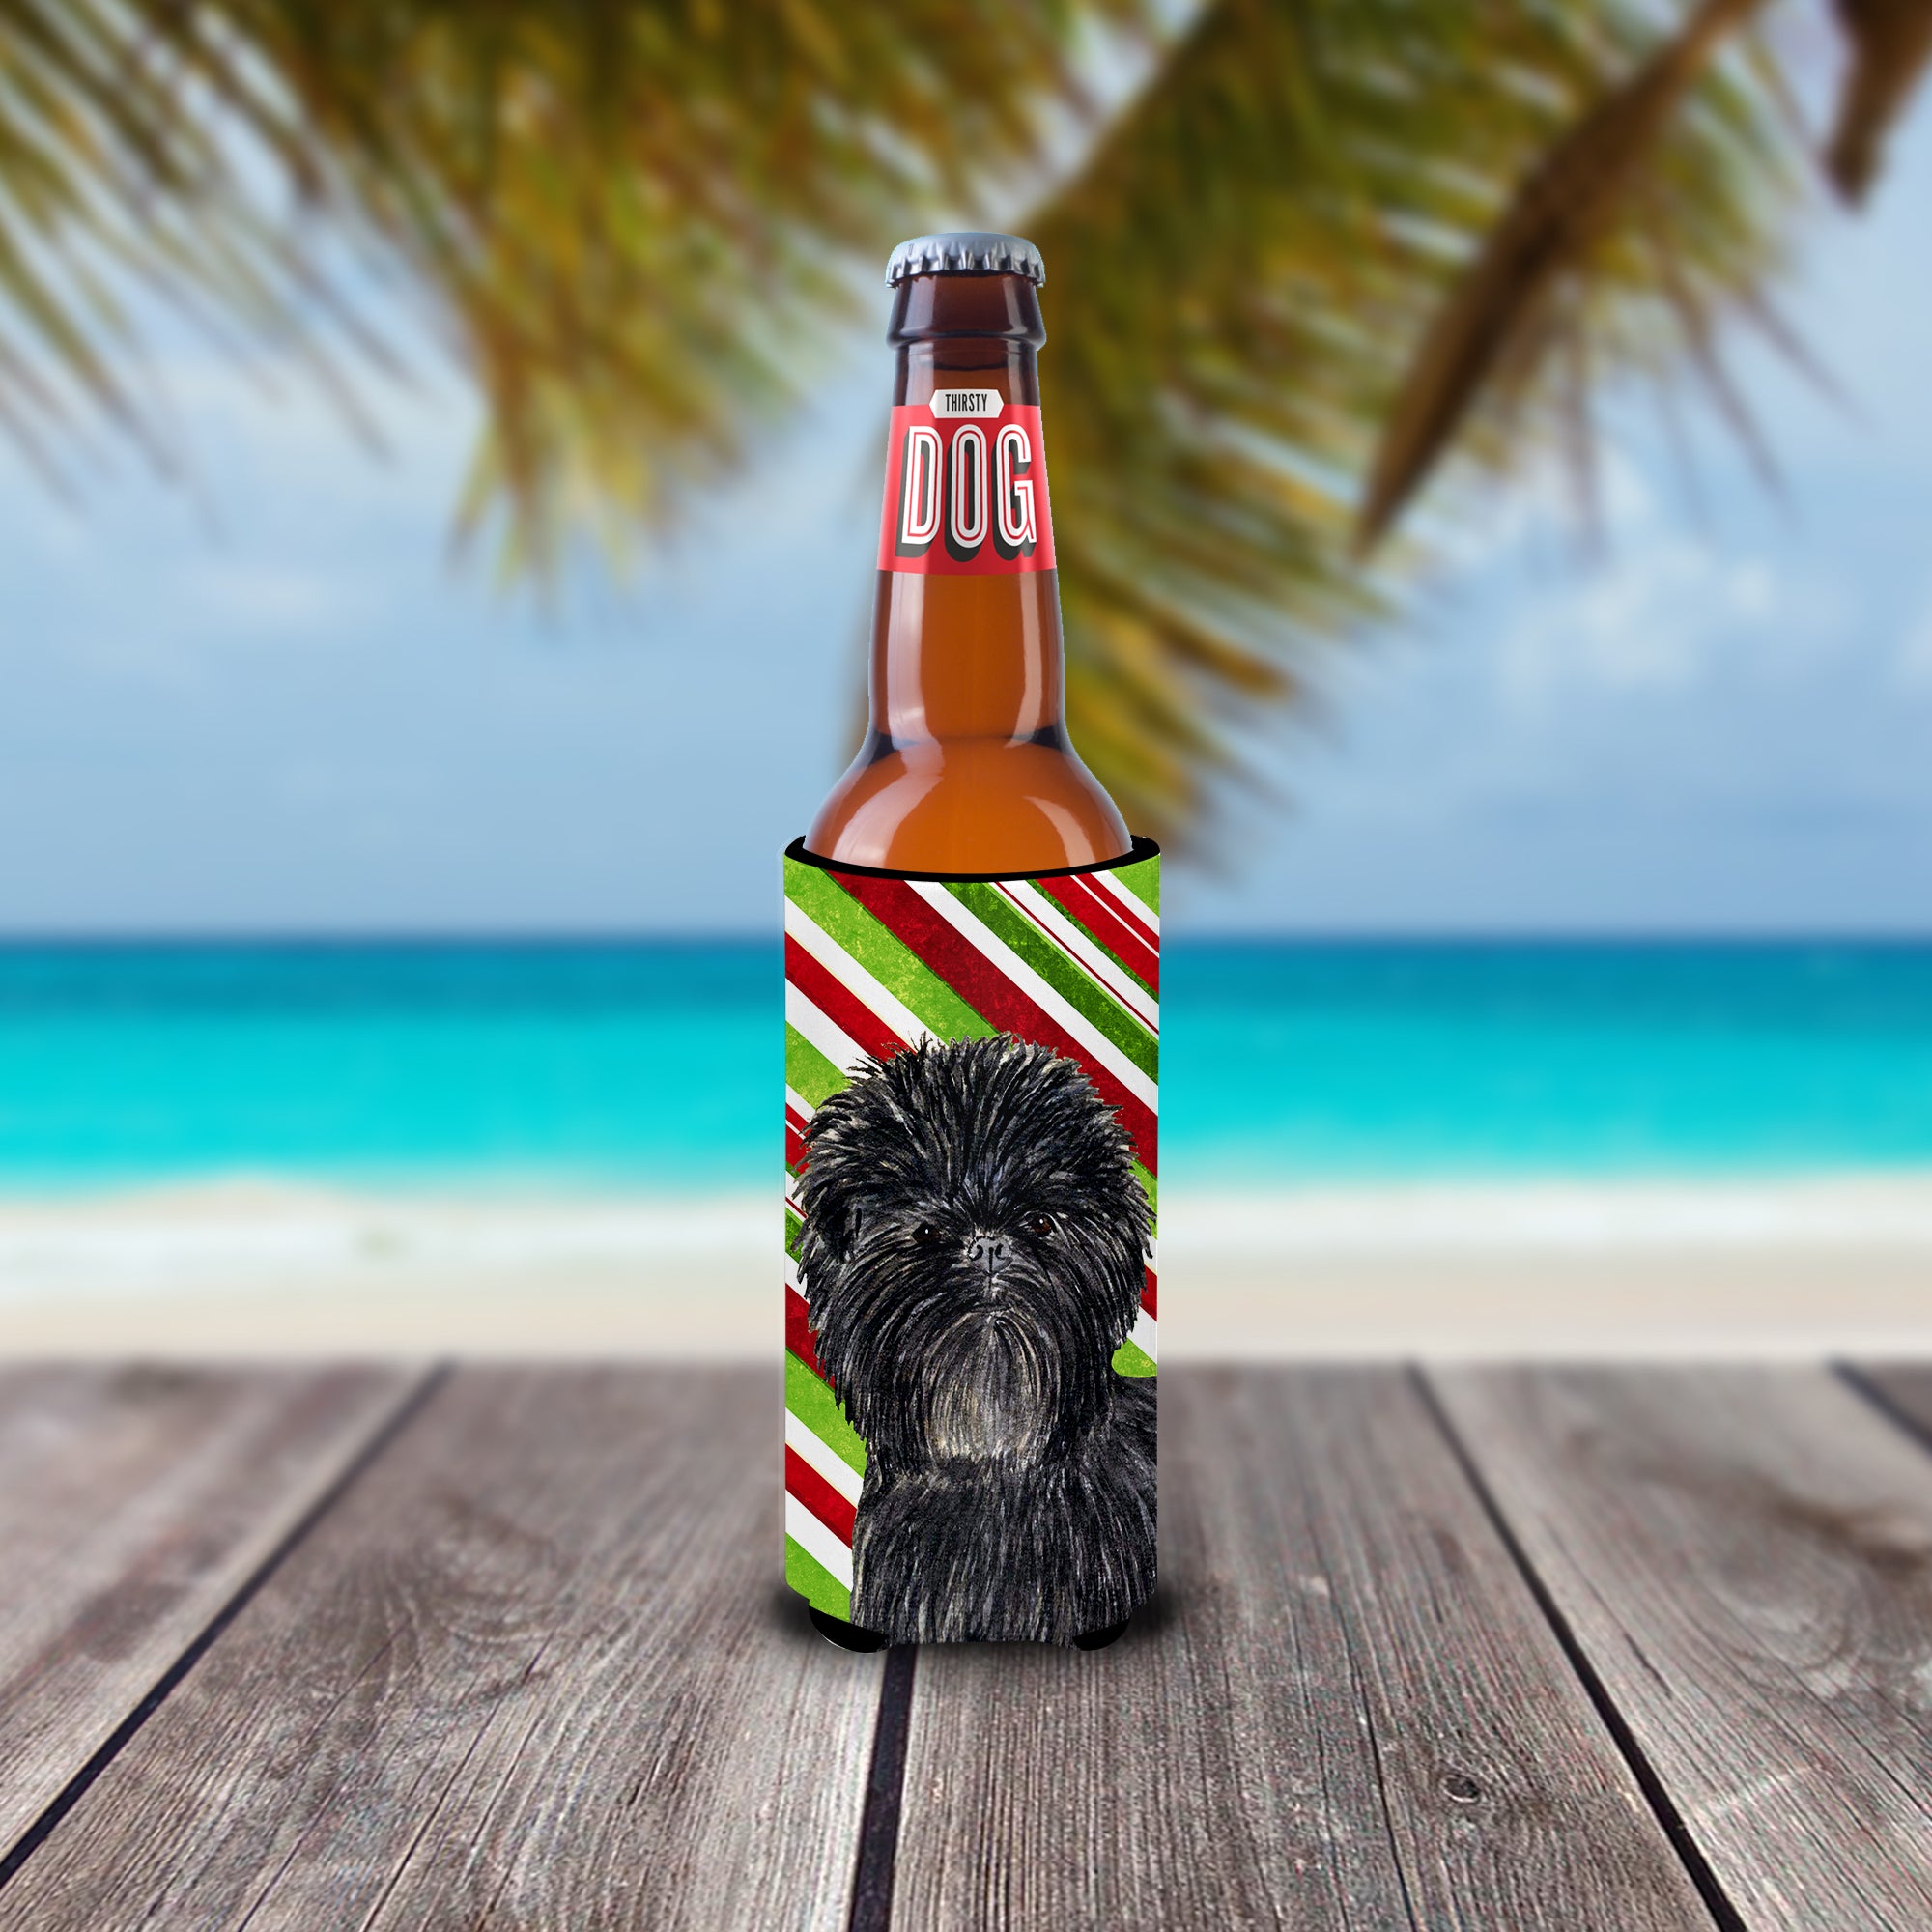 Affenpinscher Candy Cane Holiday Christmas Ultra Beverage Insulators for slim cans SS4580MUK